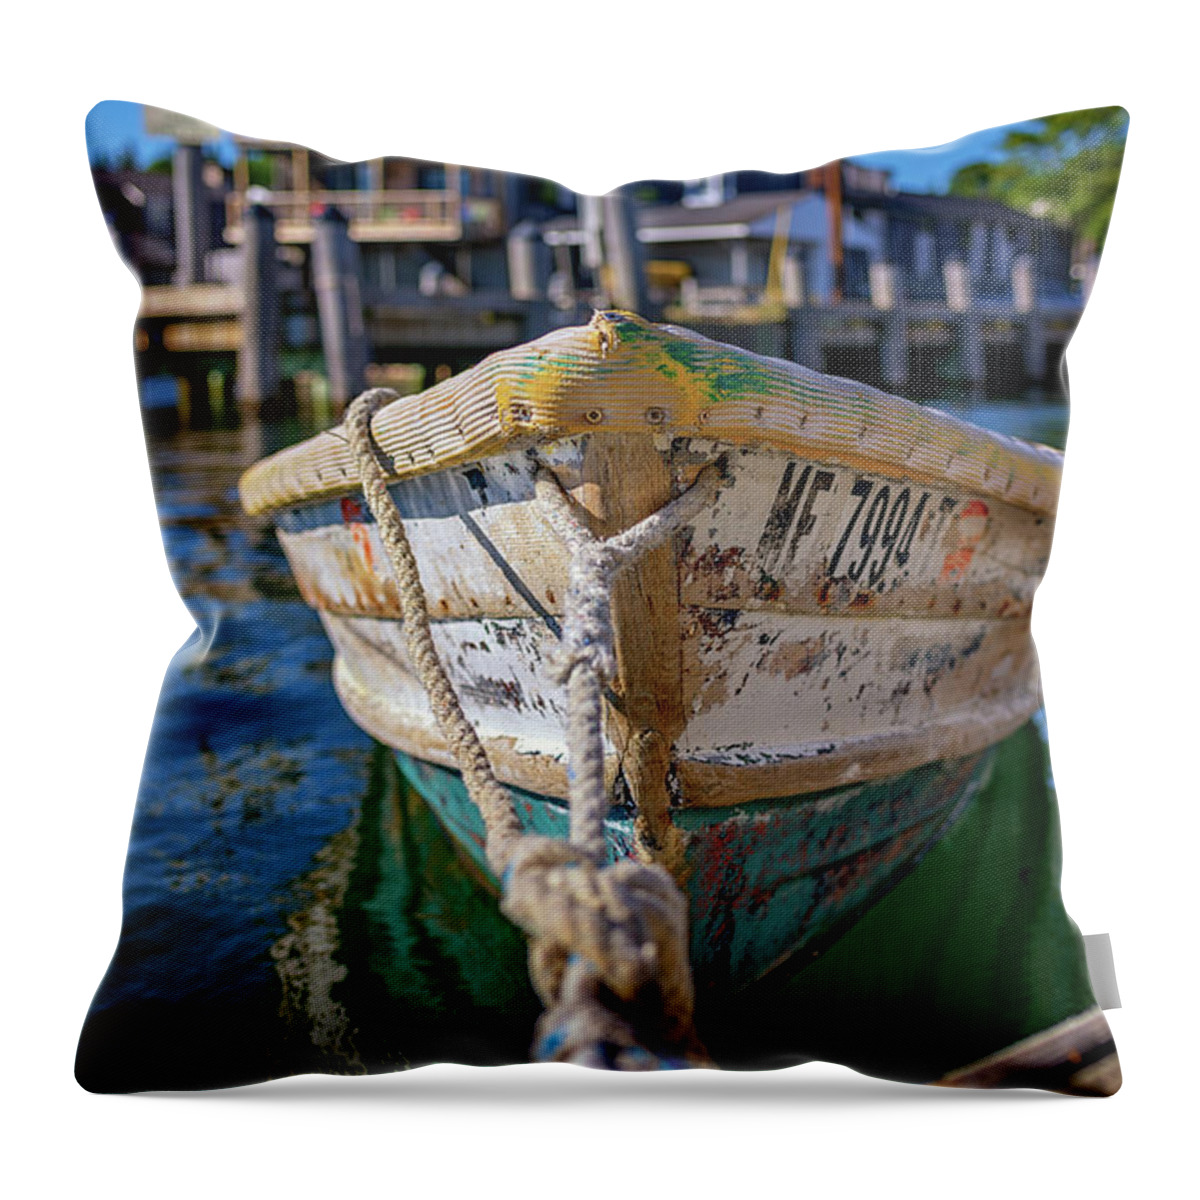 Southwest Harbor Throw Pillow featuring the photograph Southwest Harbor by Rick Berk